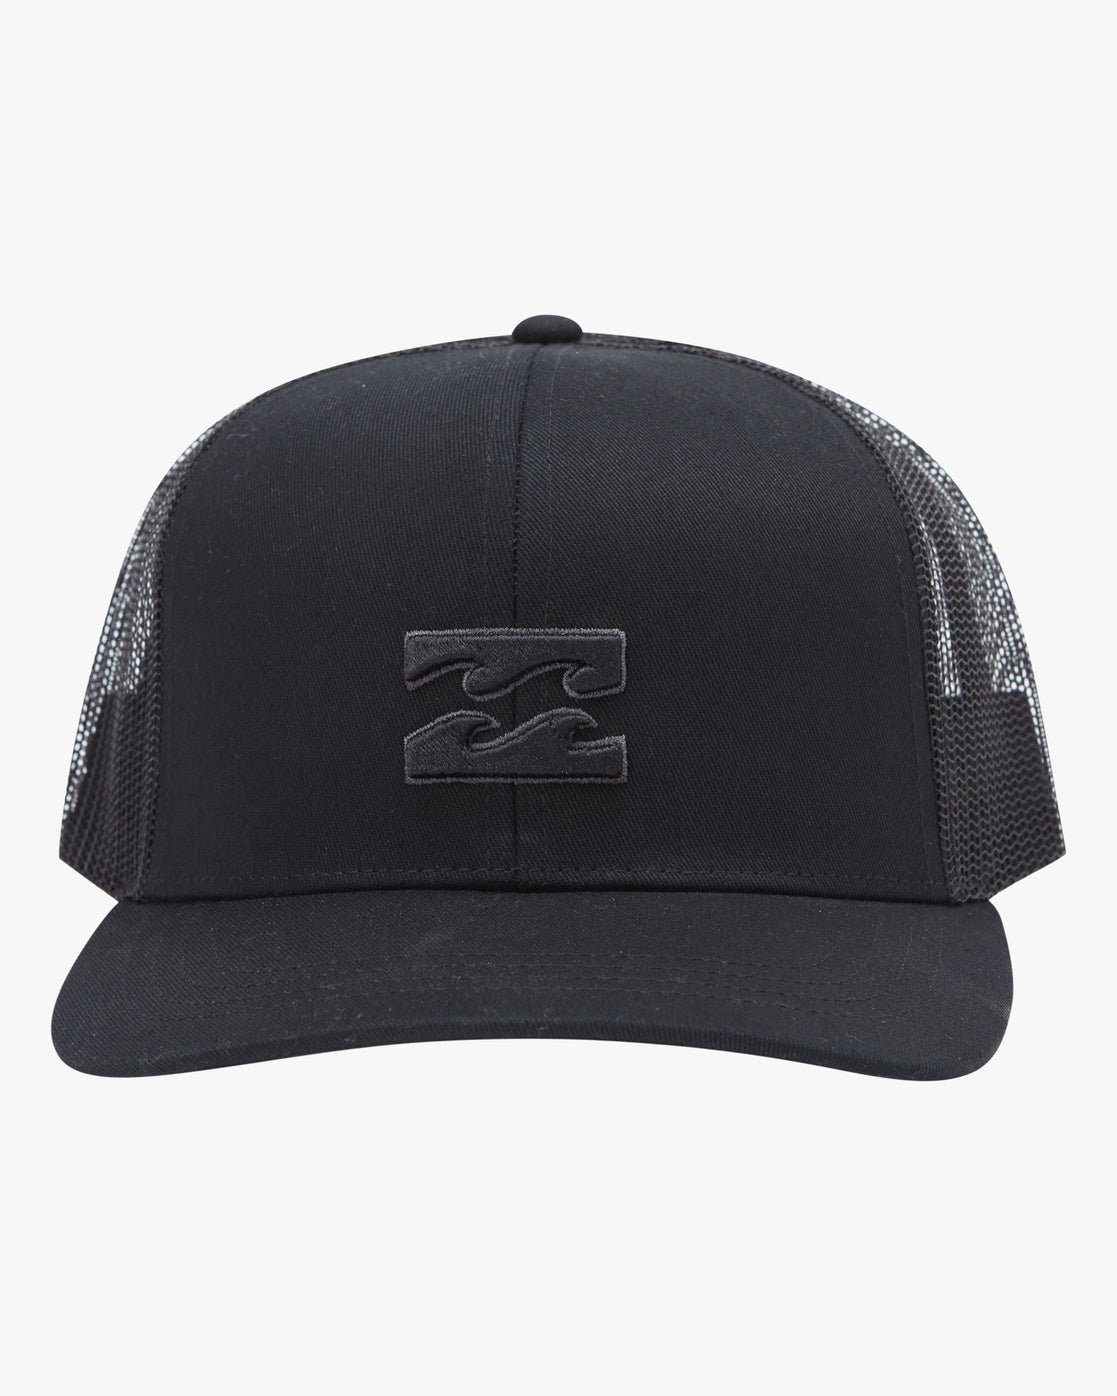 ALL DAY SNAPBACK - ABYHA00294